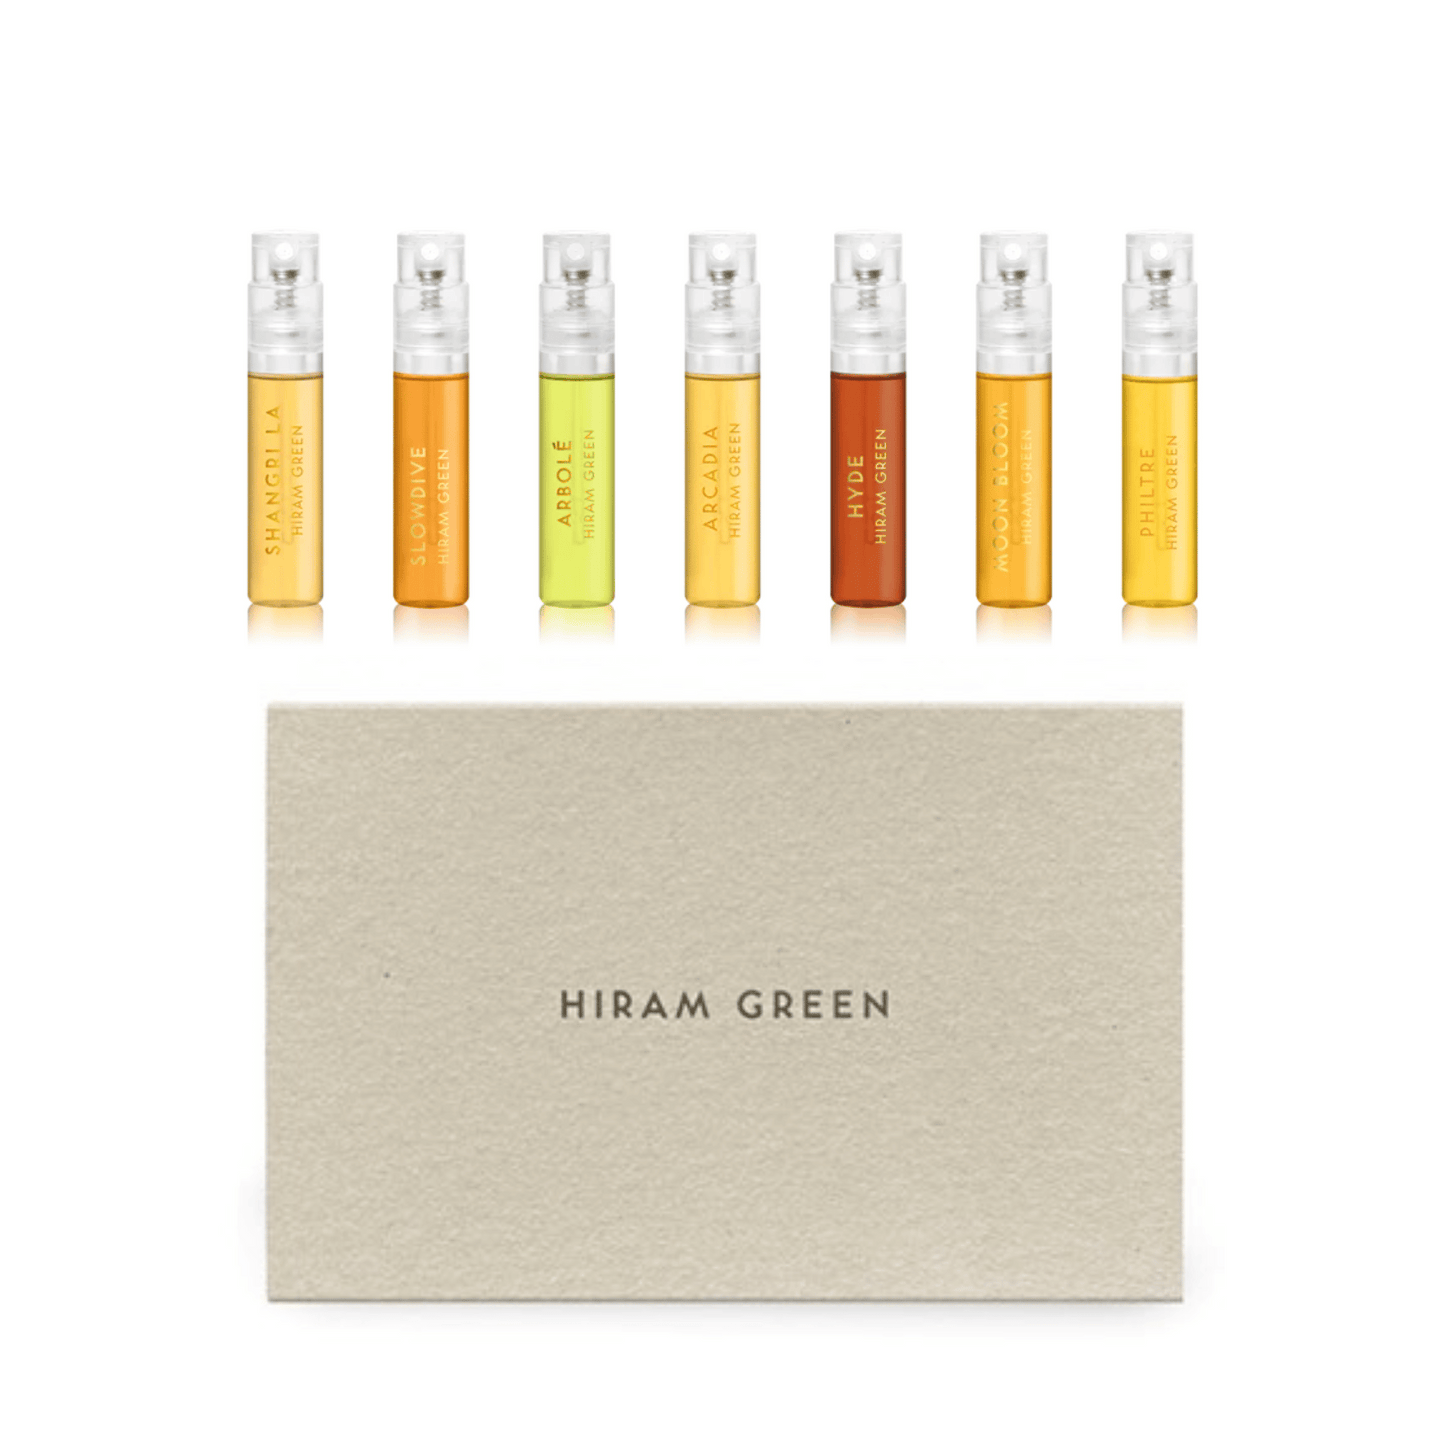 Primary Image of Fragrance Discovery Set